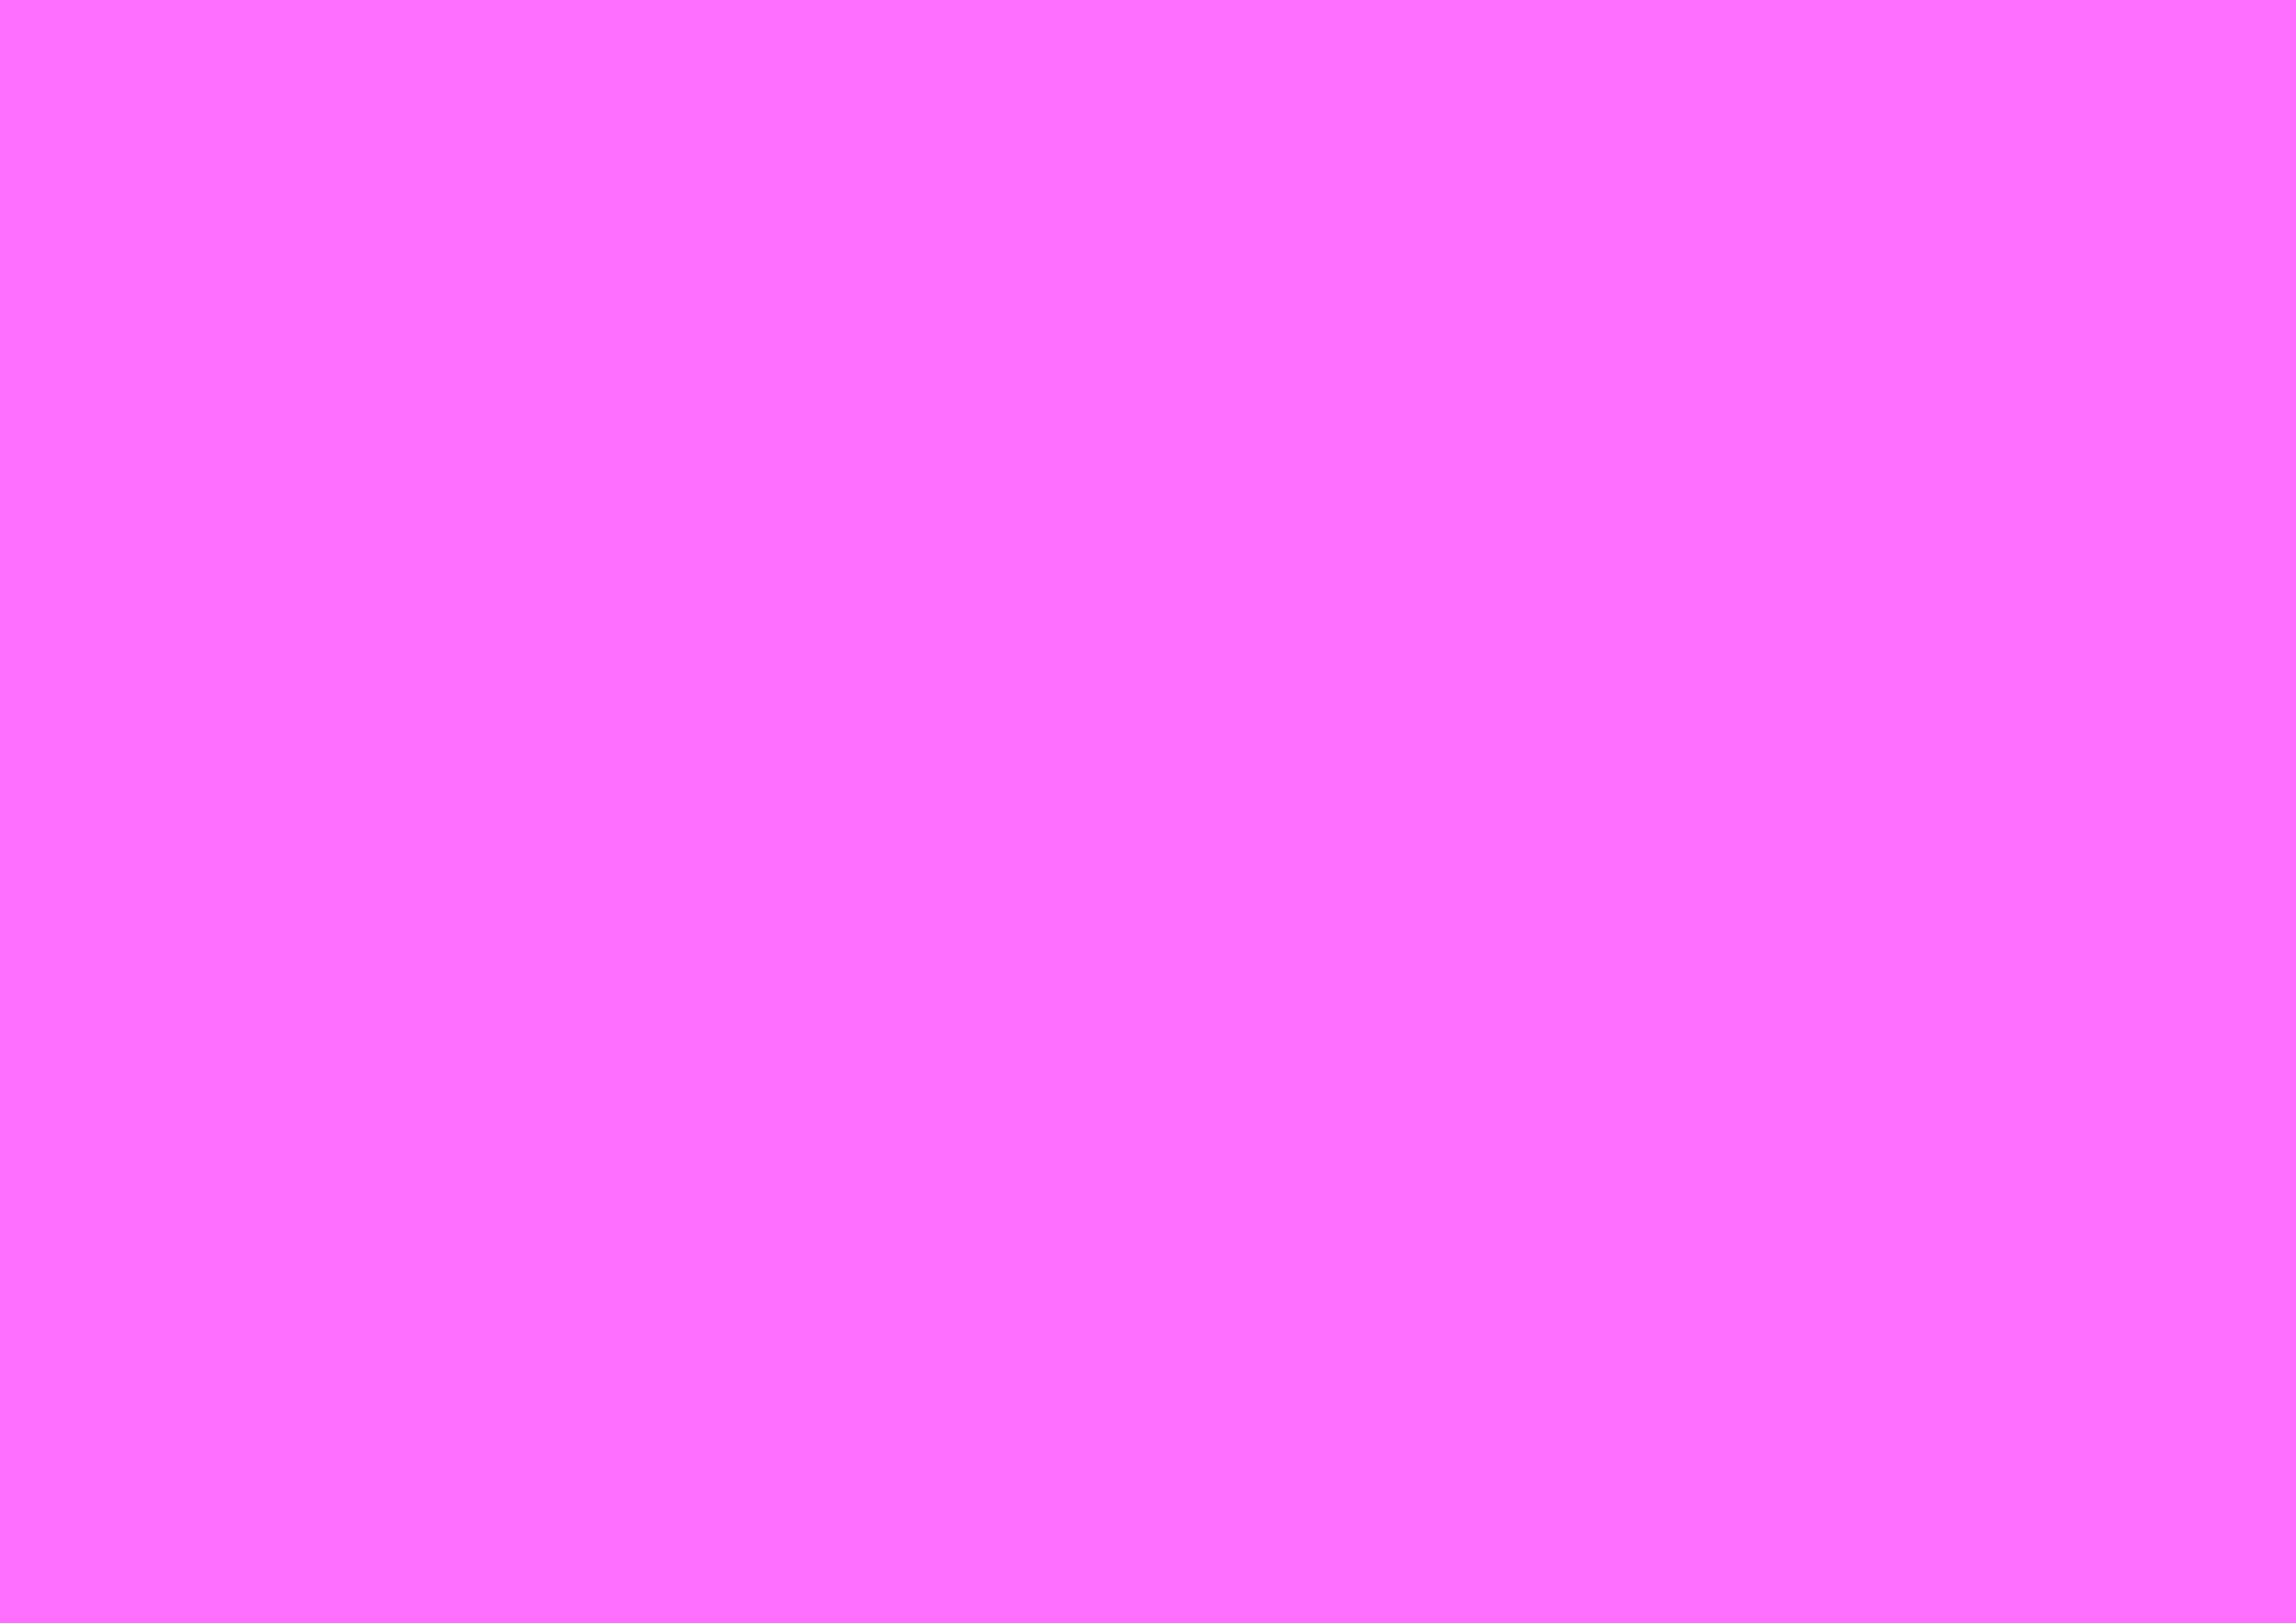 3508x2480 Ultra Pink Solid Color Background